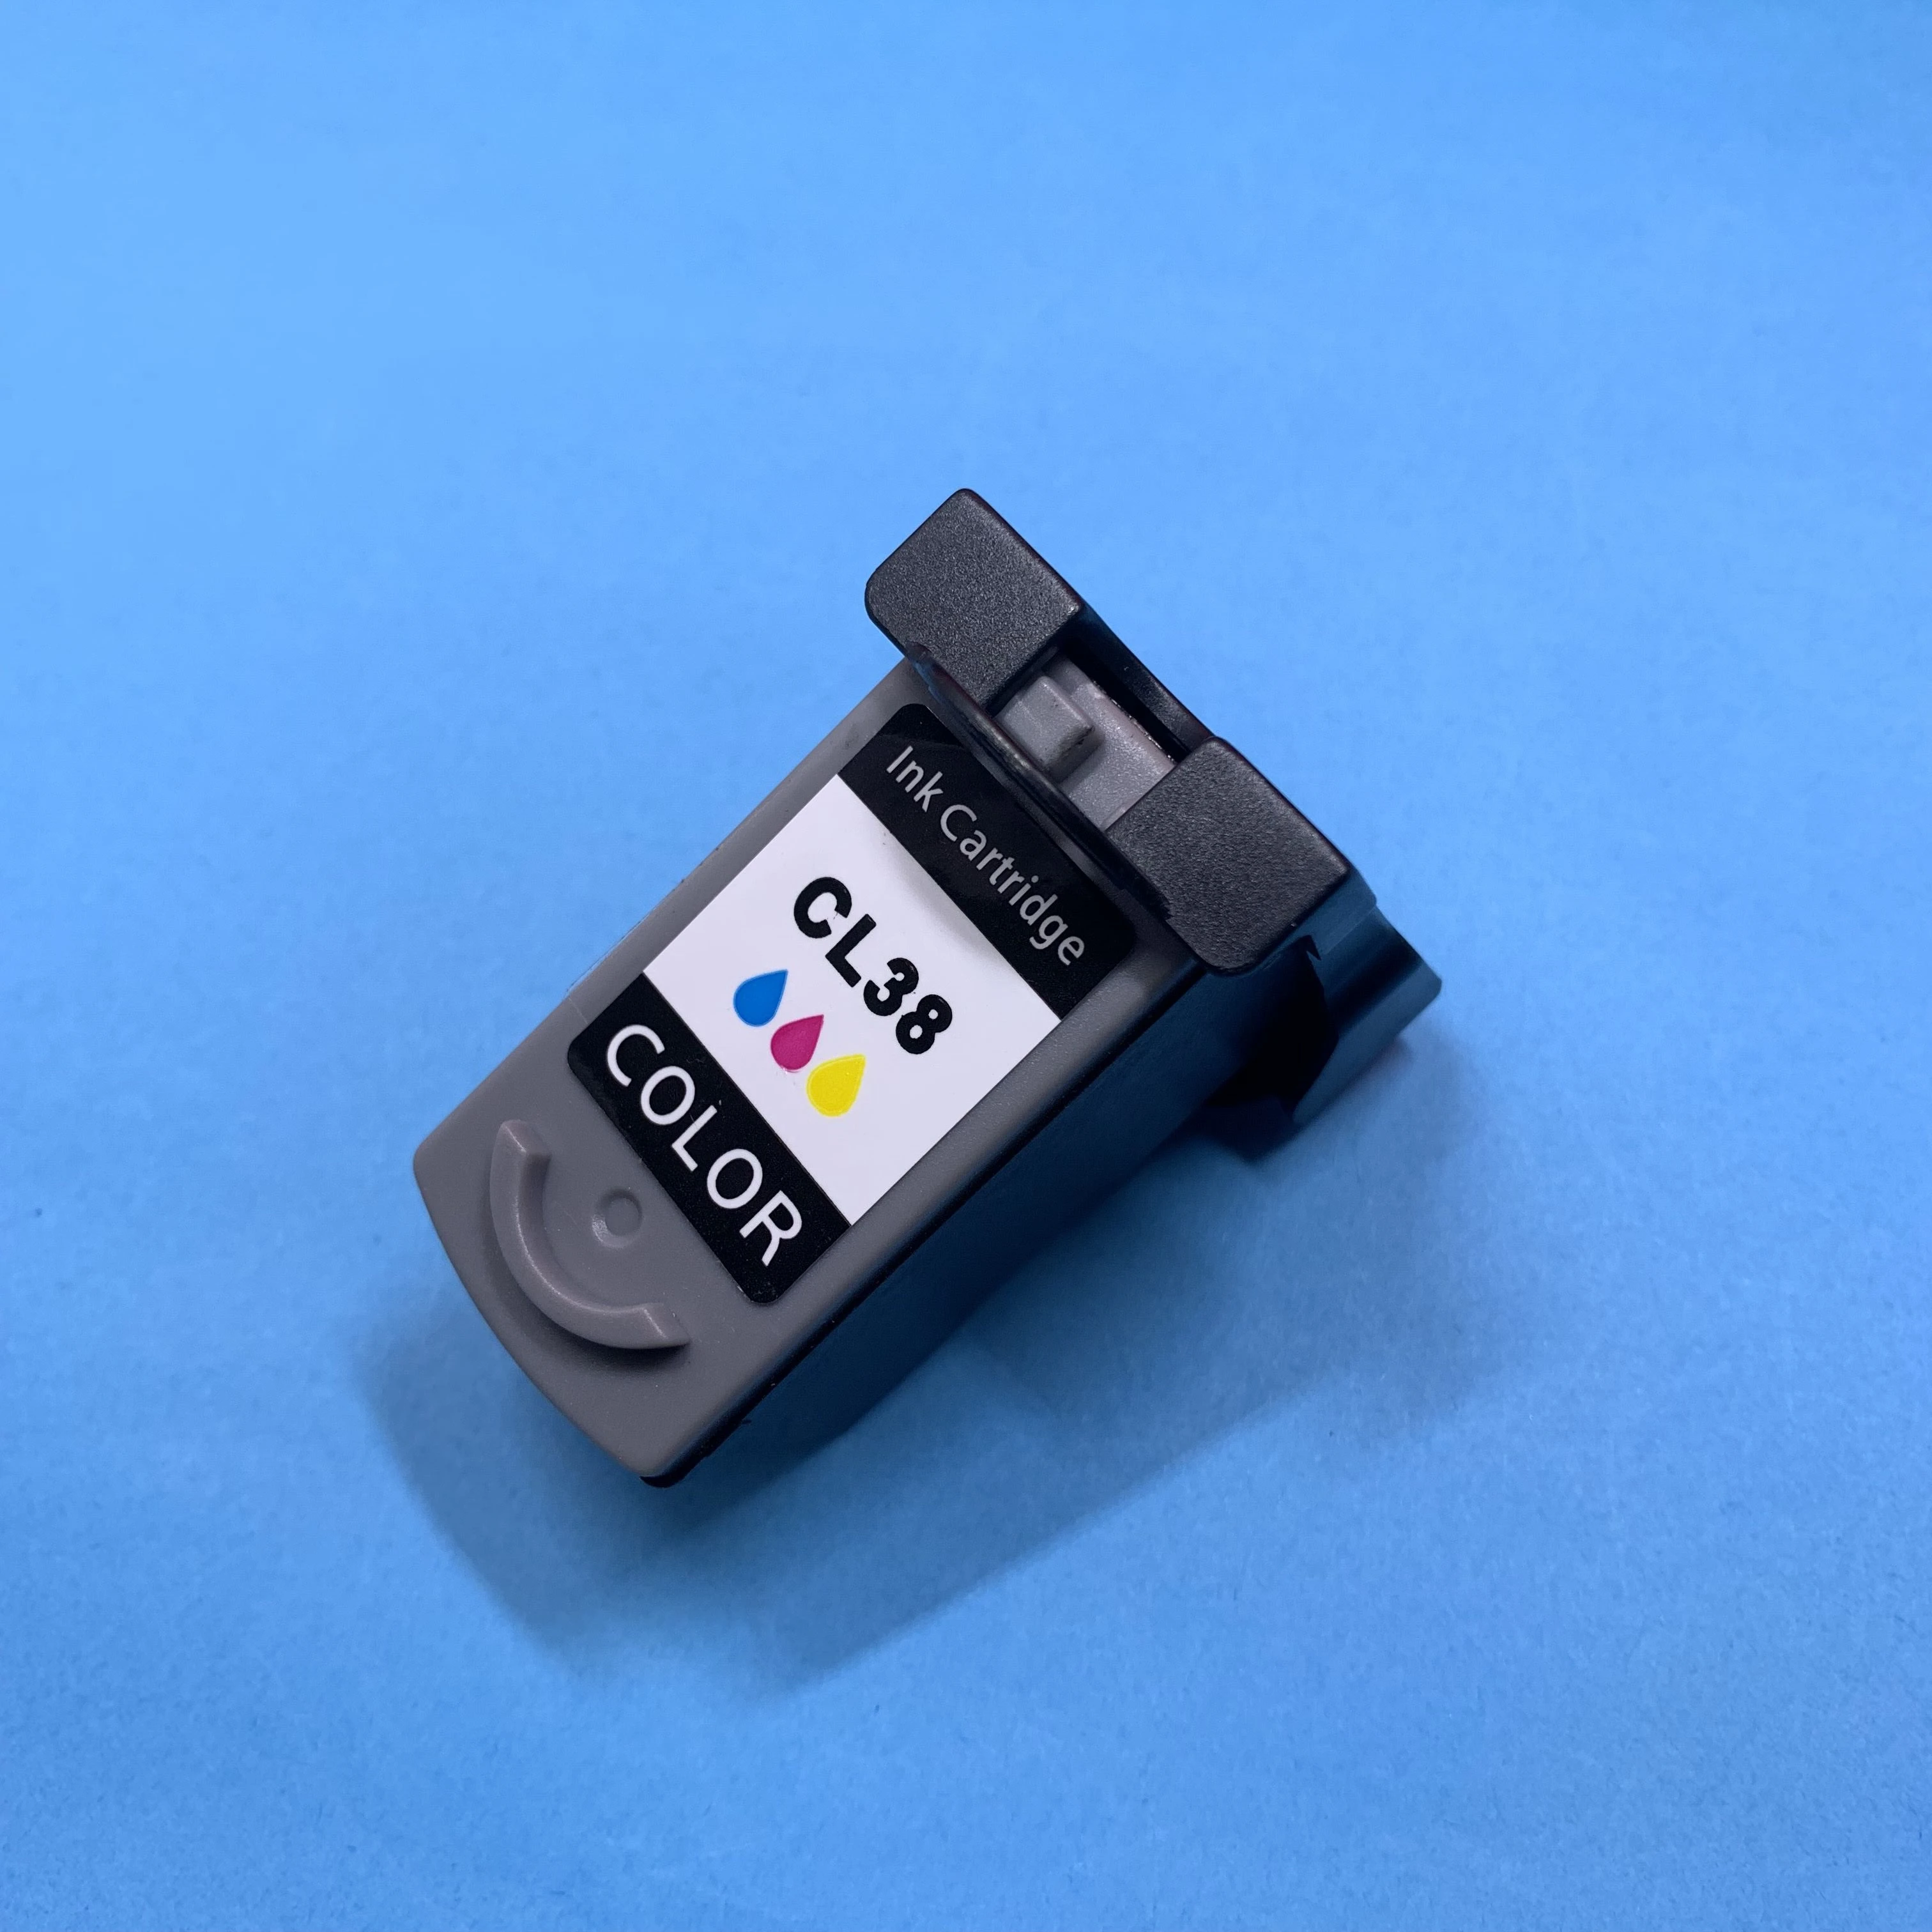 

PG37 CL38 Replacement ink cartridge for Canon PG-37 CL-38 for PIXMA MP140 MP190 MP210 MP220 MP420 IP1800 IP1900 IP2500 IP2600